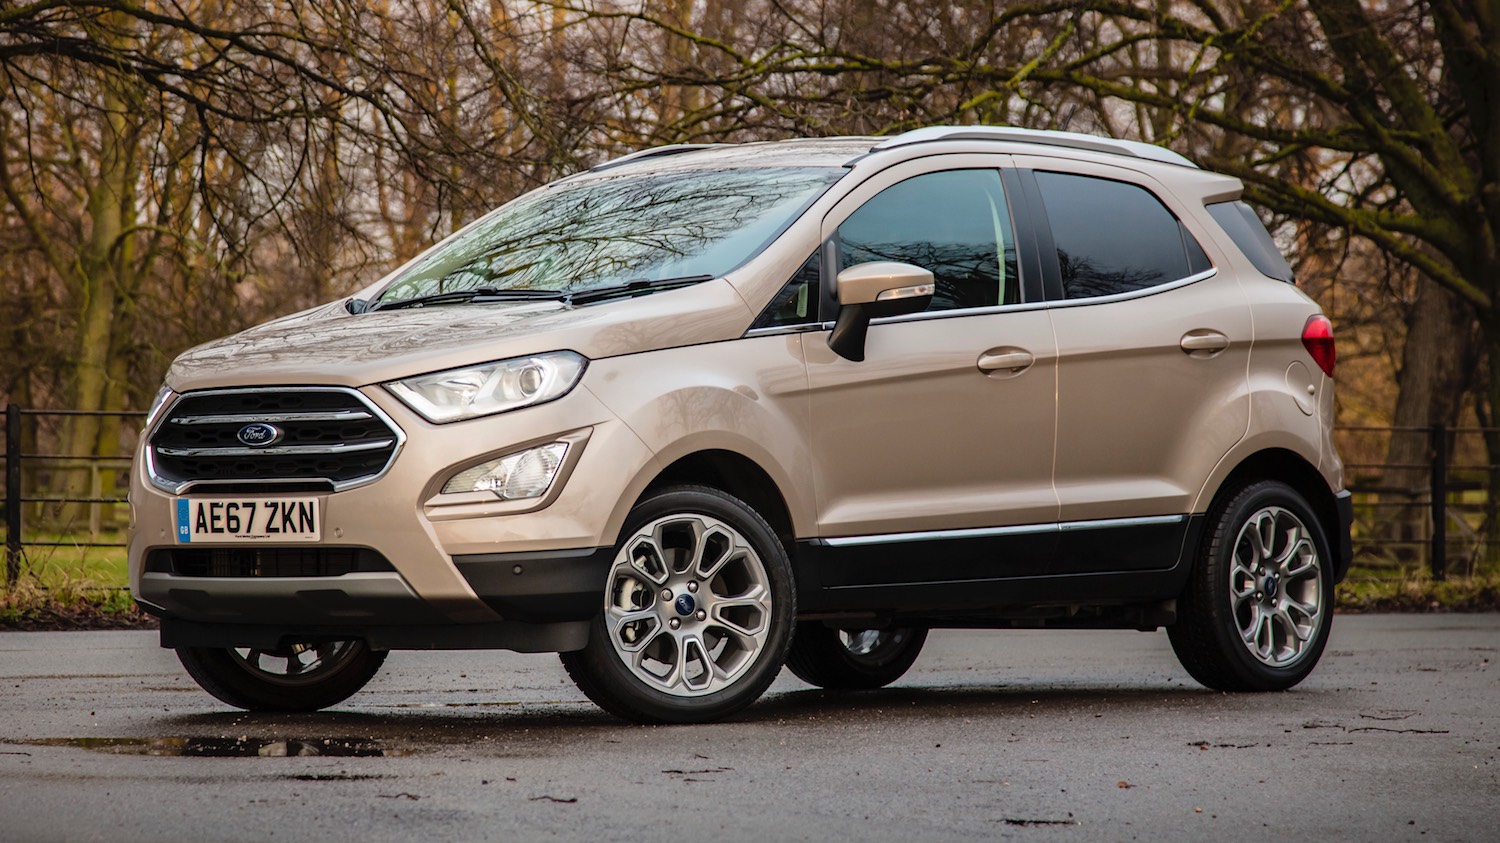 Neil Lyndon reviews the latest Ford EcoSport Titanium for Drive 3